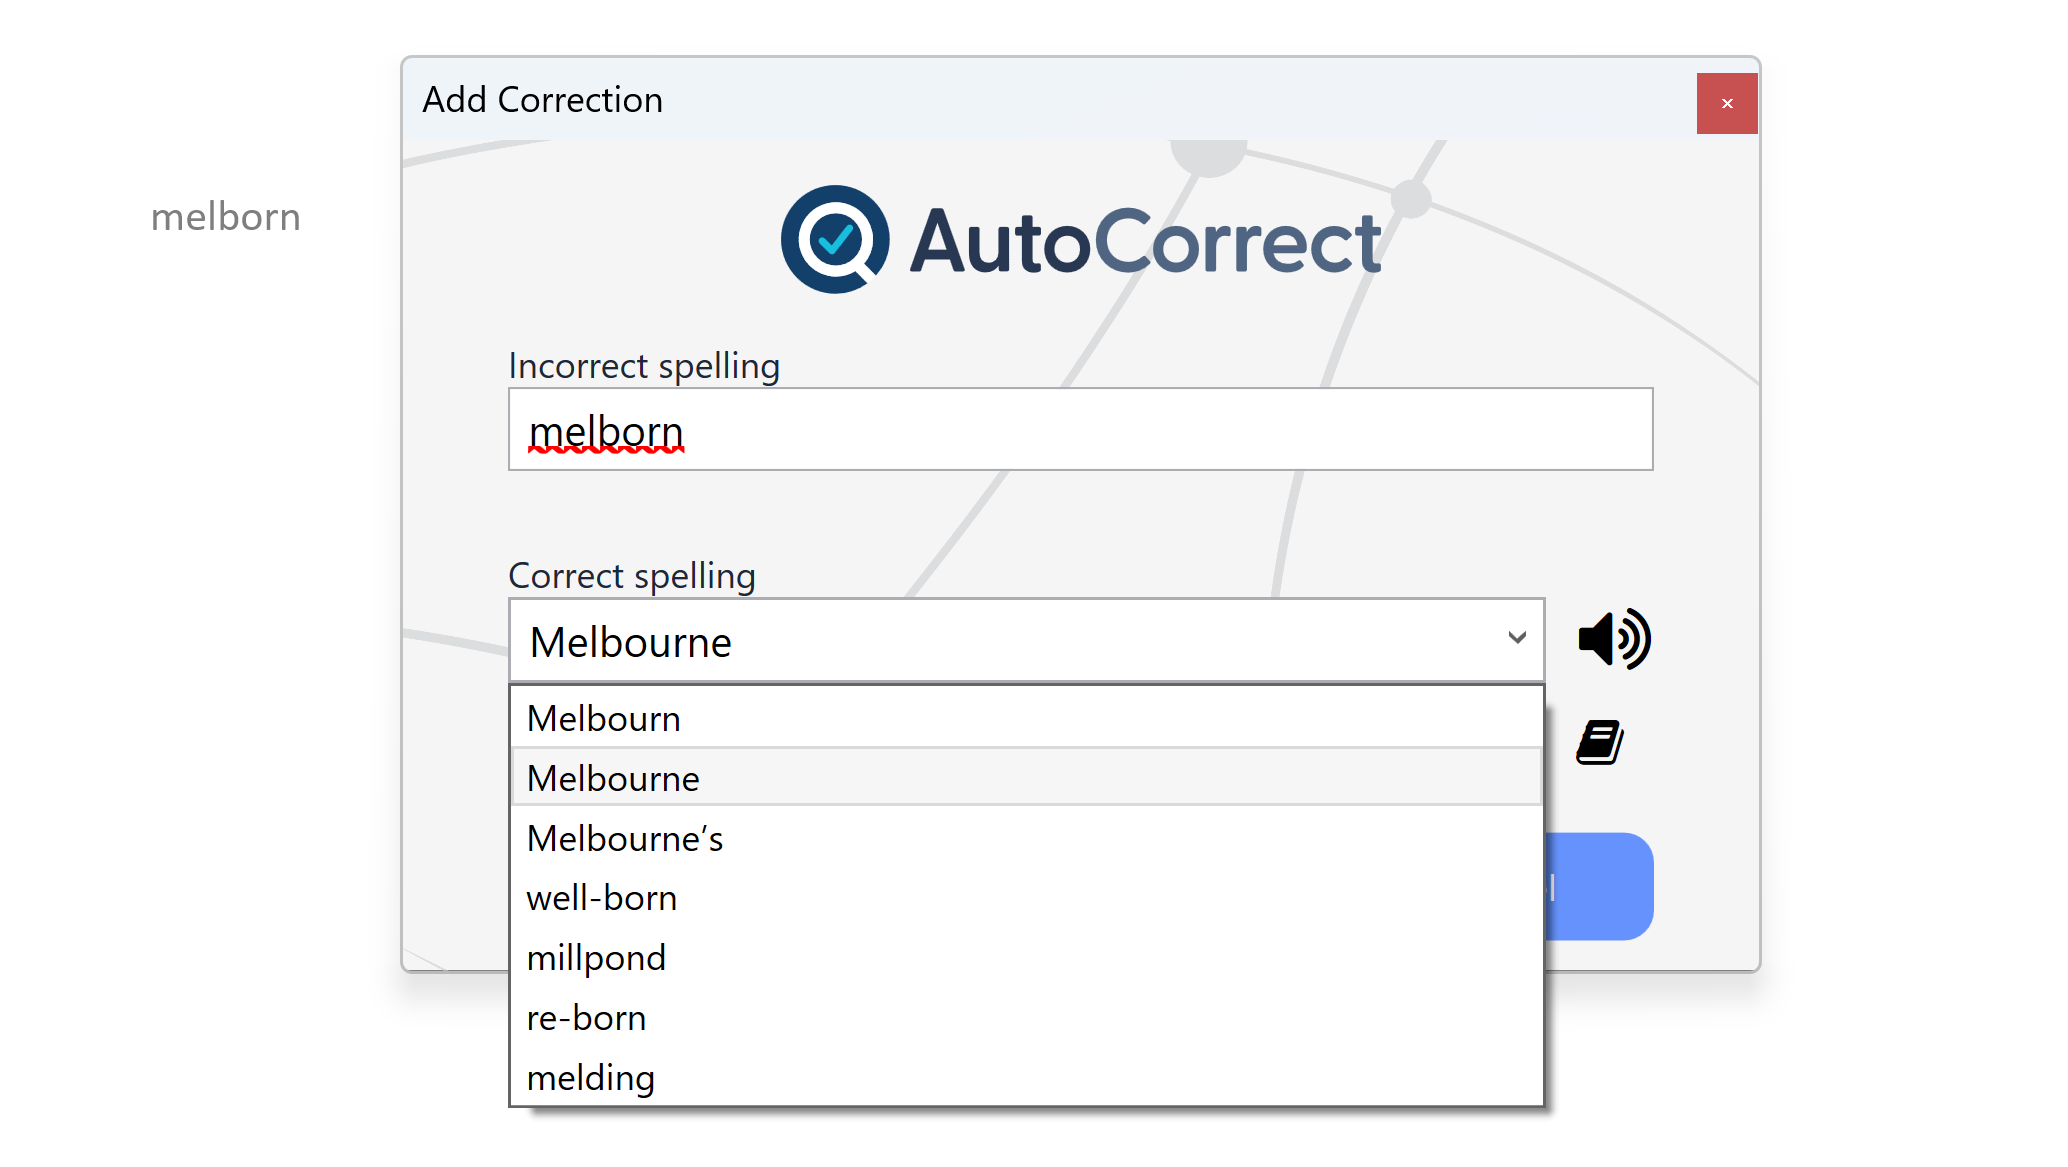 The Add Correction window, with the drop-down list of further suggestions shown